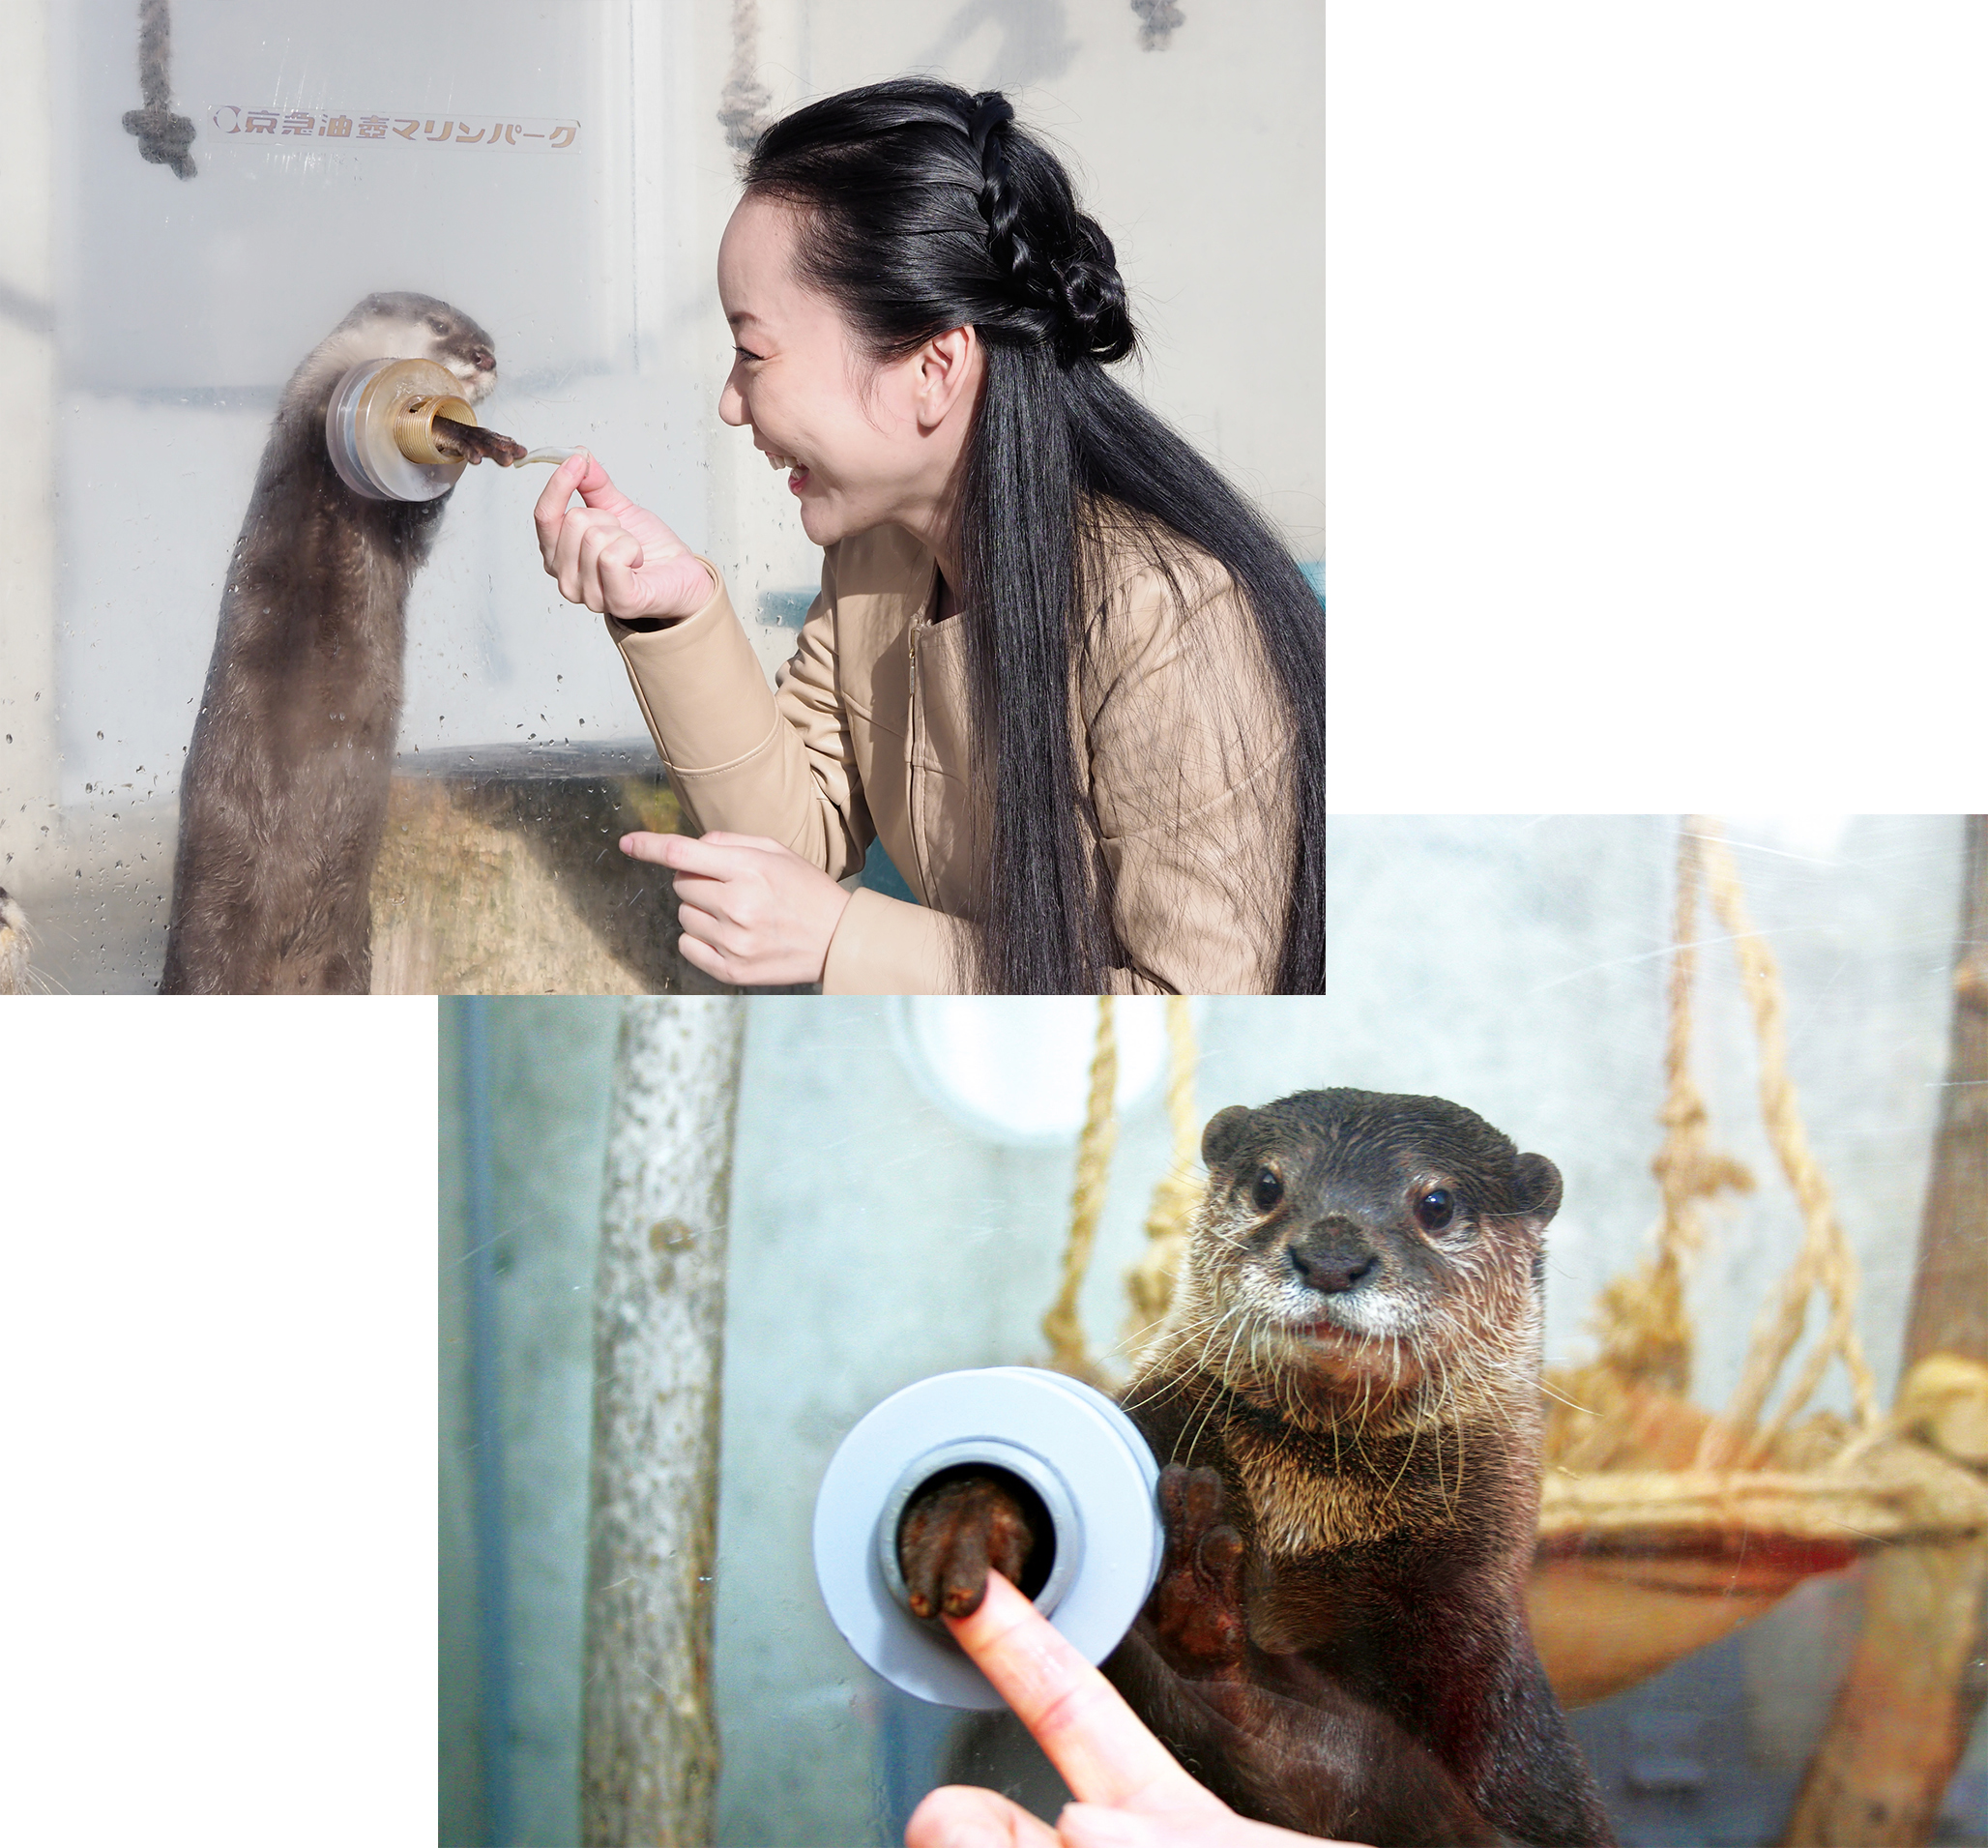 Let's meet cute otters and penguins